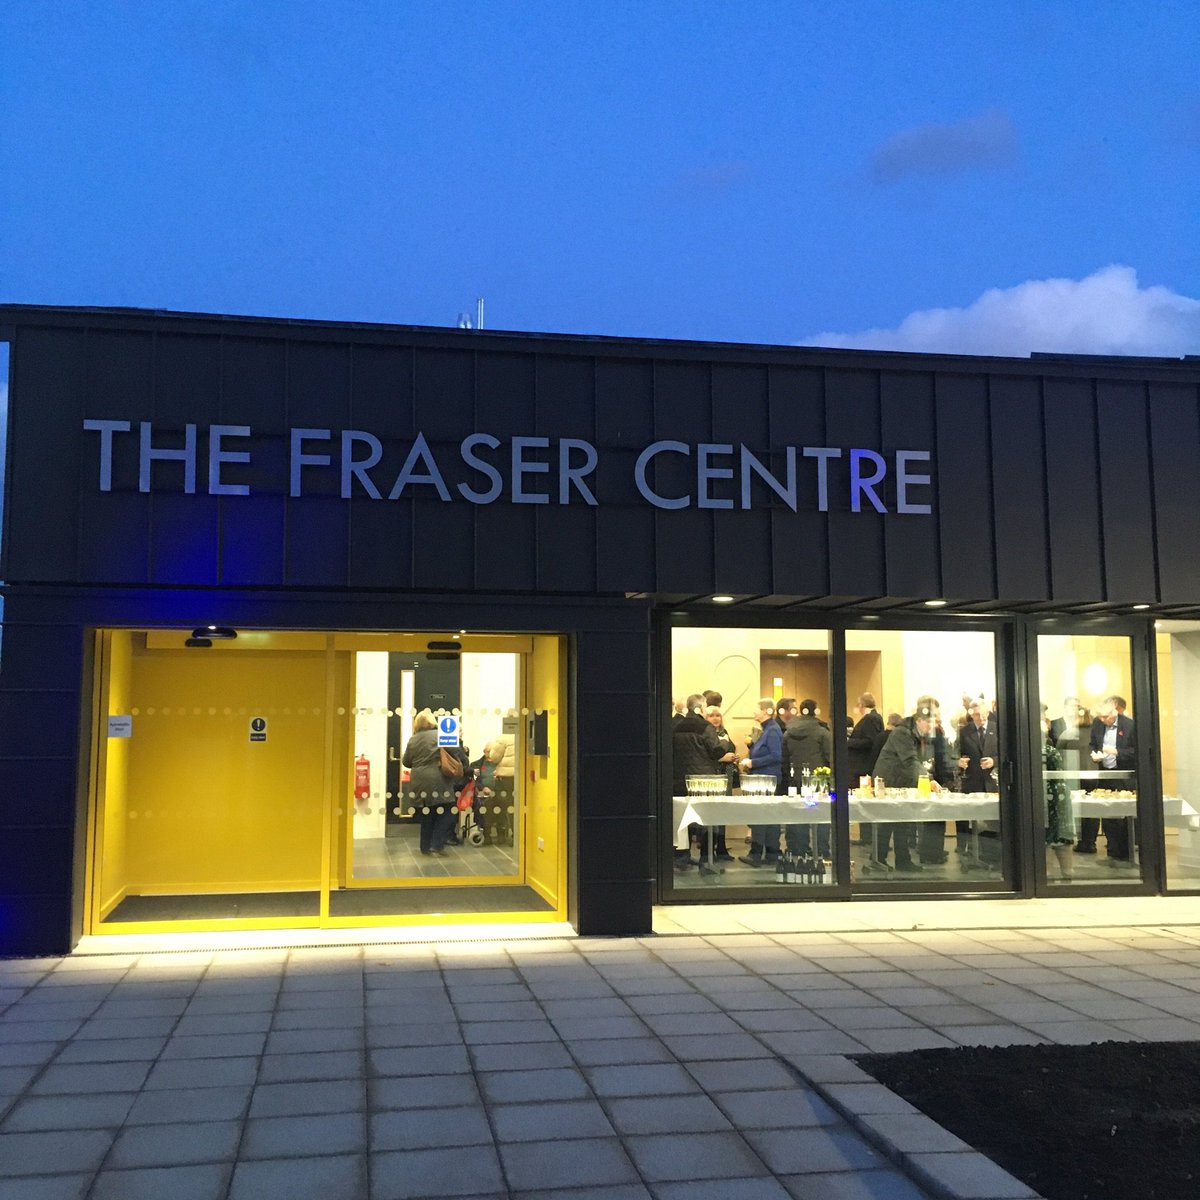 ‘ @thefrasercentre is OPEN! Testament to the hard work of the Fraser Centre Community Trust and all the other volunteers over the last 9 years. Local people, Lottery Players, @eastlothianAP @ELCouncil @HistEnvScot @housingregen all provided vital funds #lotteryfunded #Tranent